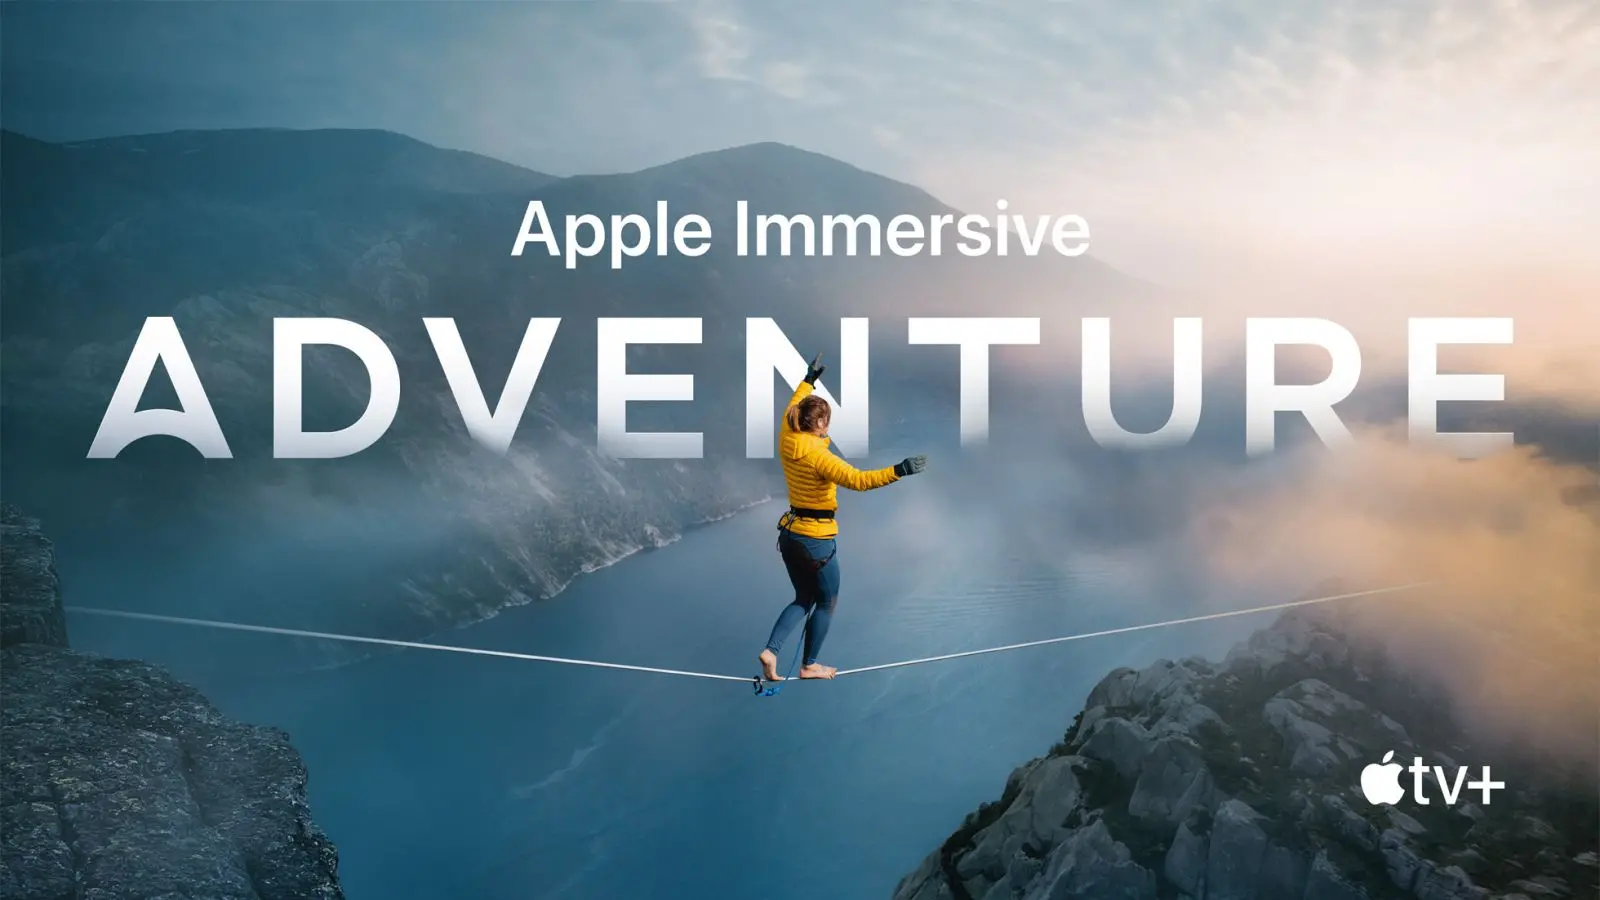 adventure with Apple Vision Pro